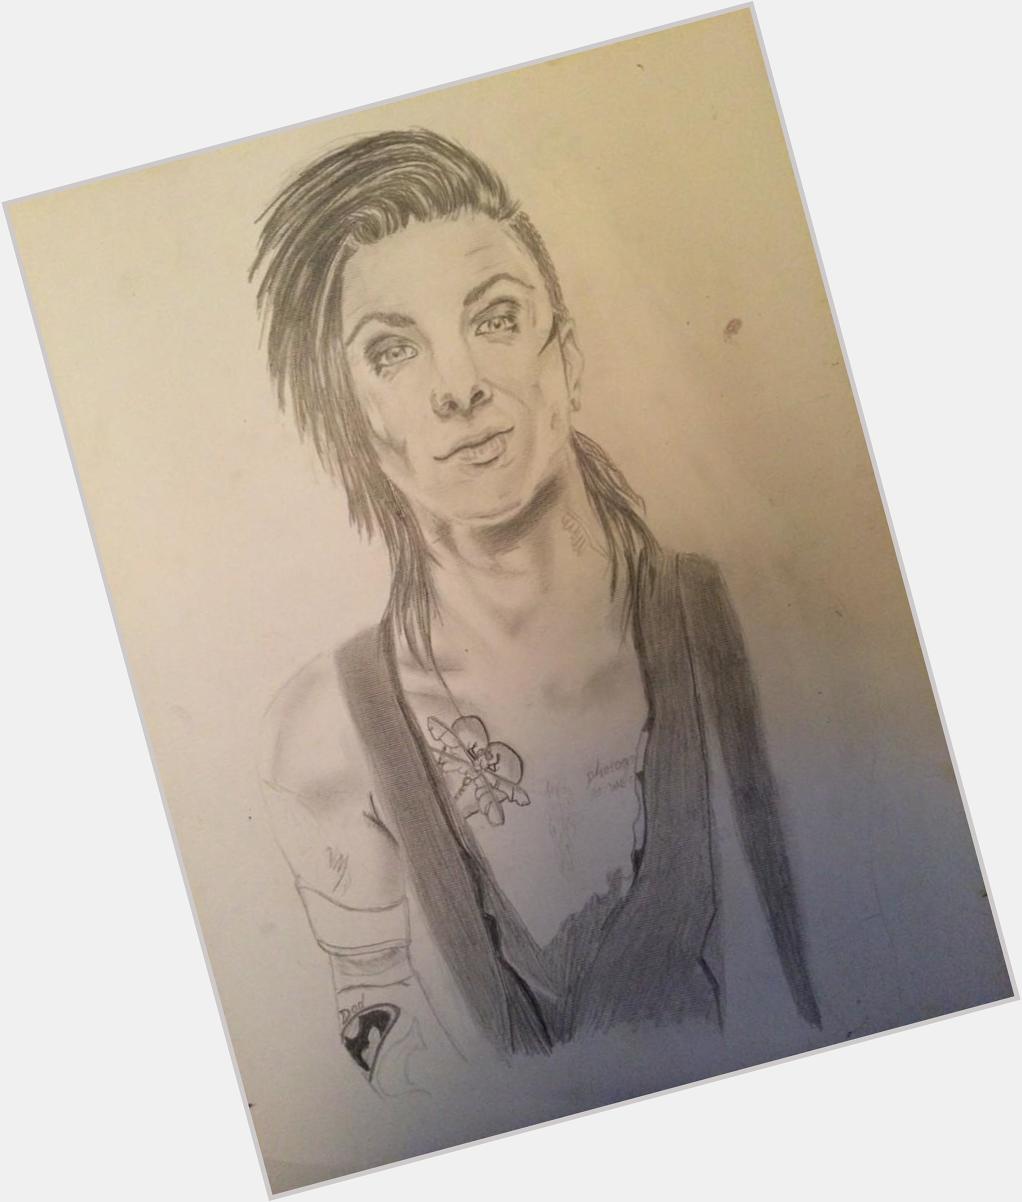 Almost finished  happy birthday to the amazing Andy Biersack 